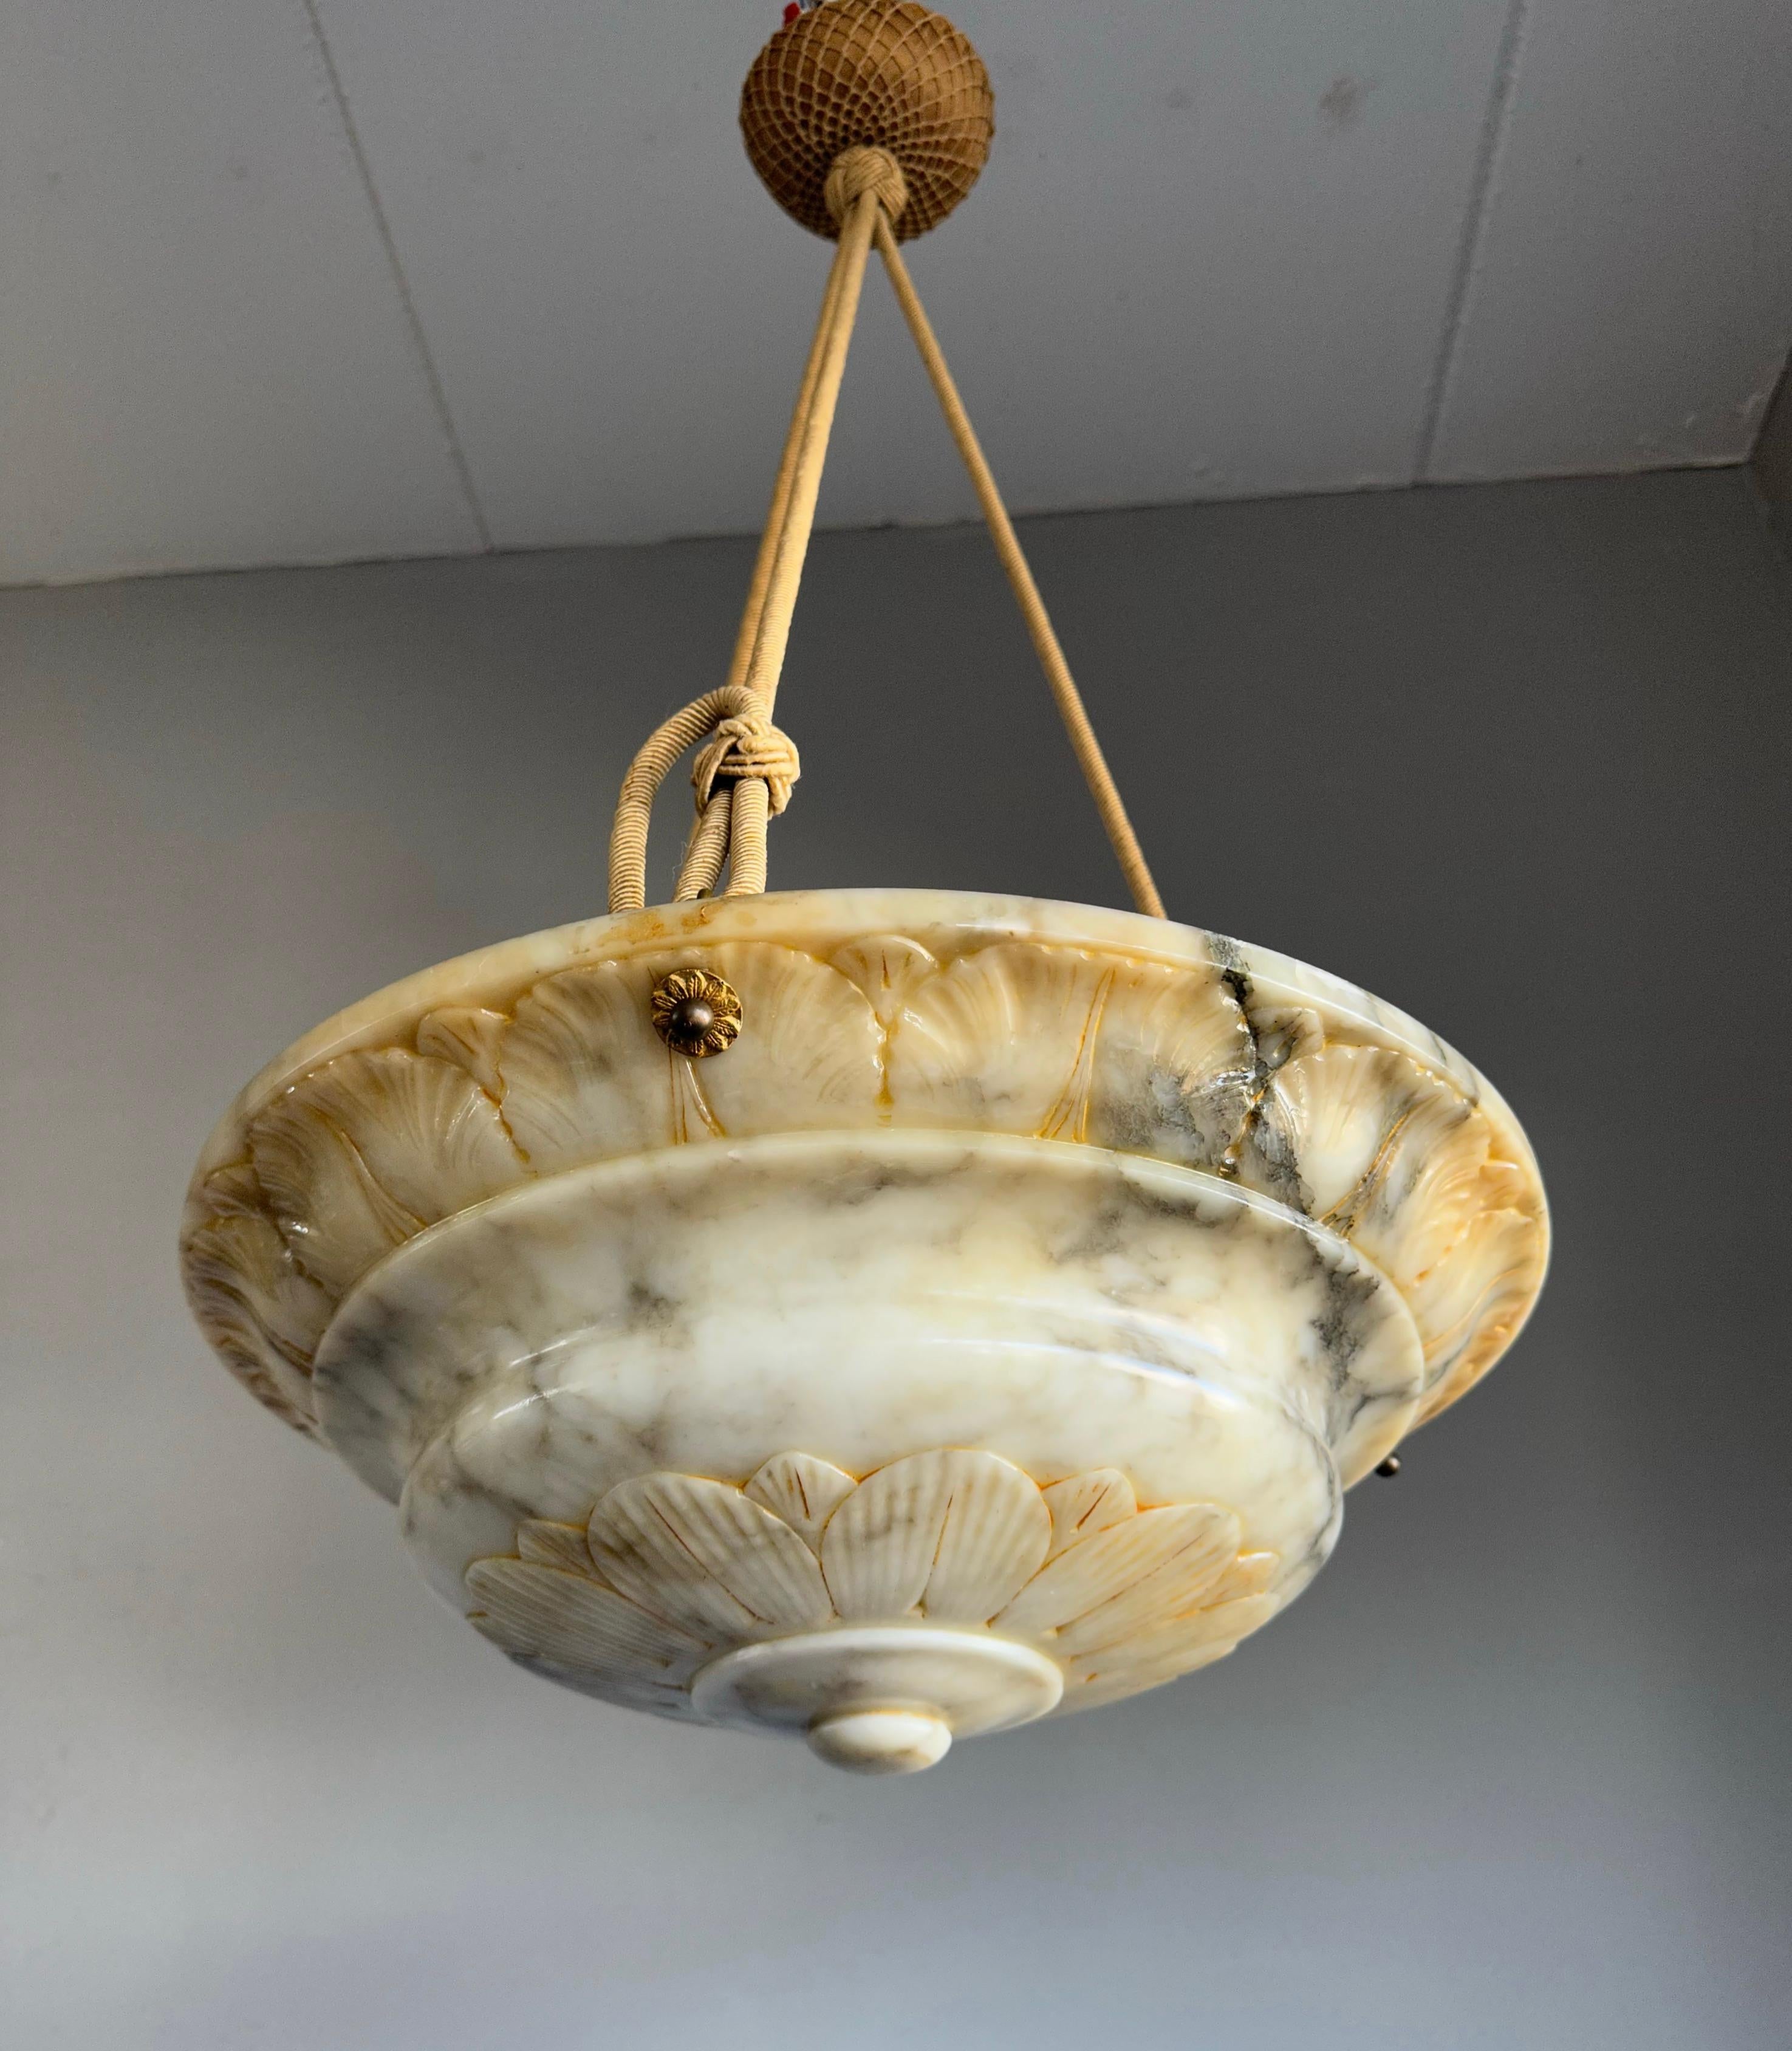 Top class chandelier with a unique white, black and amber color alabaster shade, perfect ropes and a hand knotted canopy.

Thank to its restored alabaster shade this antique chandelier is again in great condition and will light up both your days and